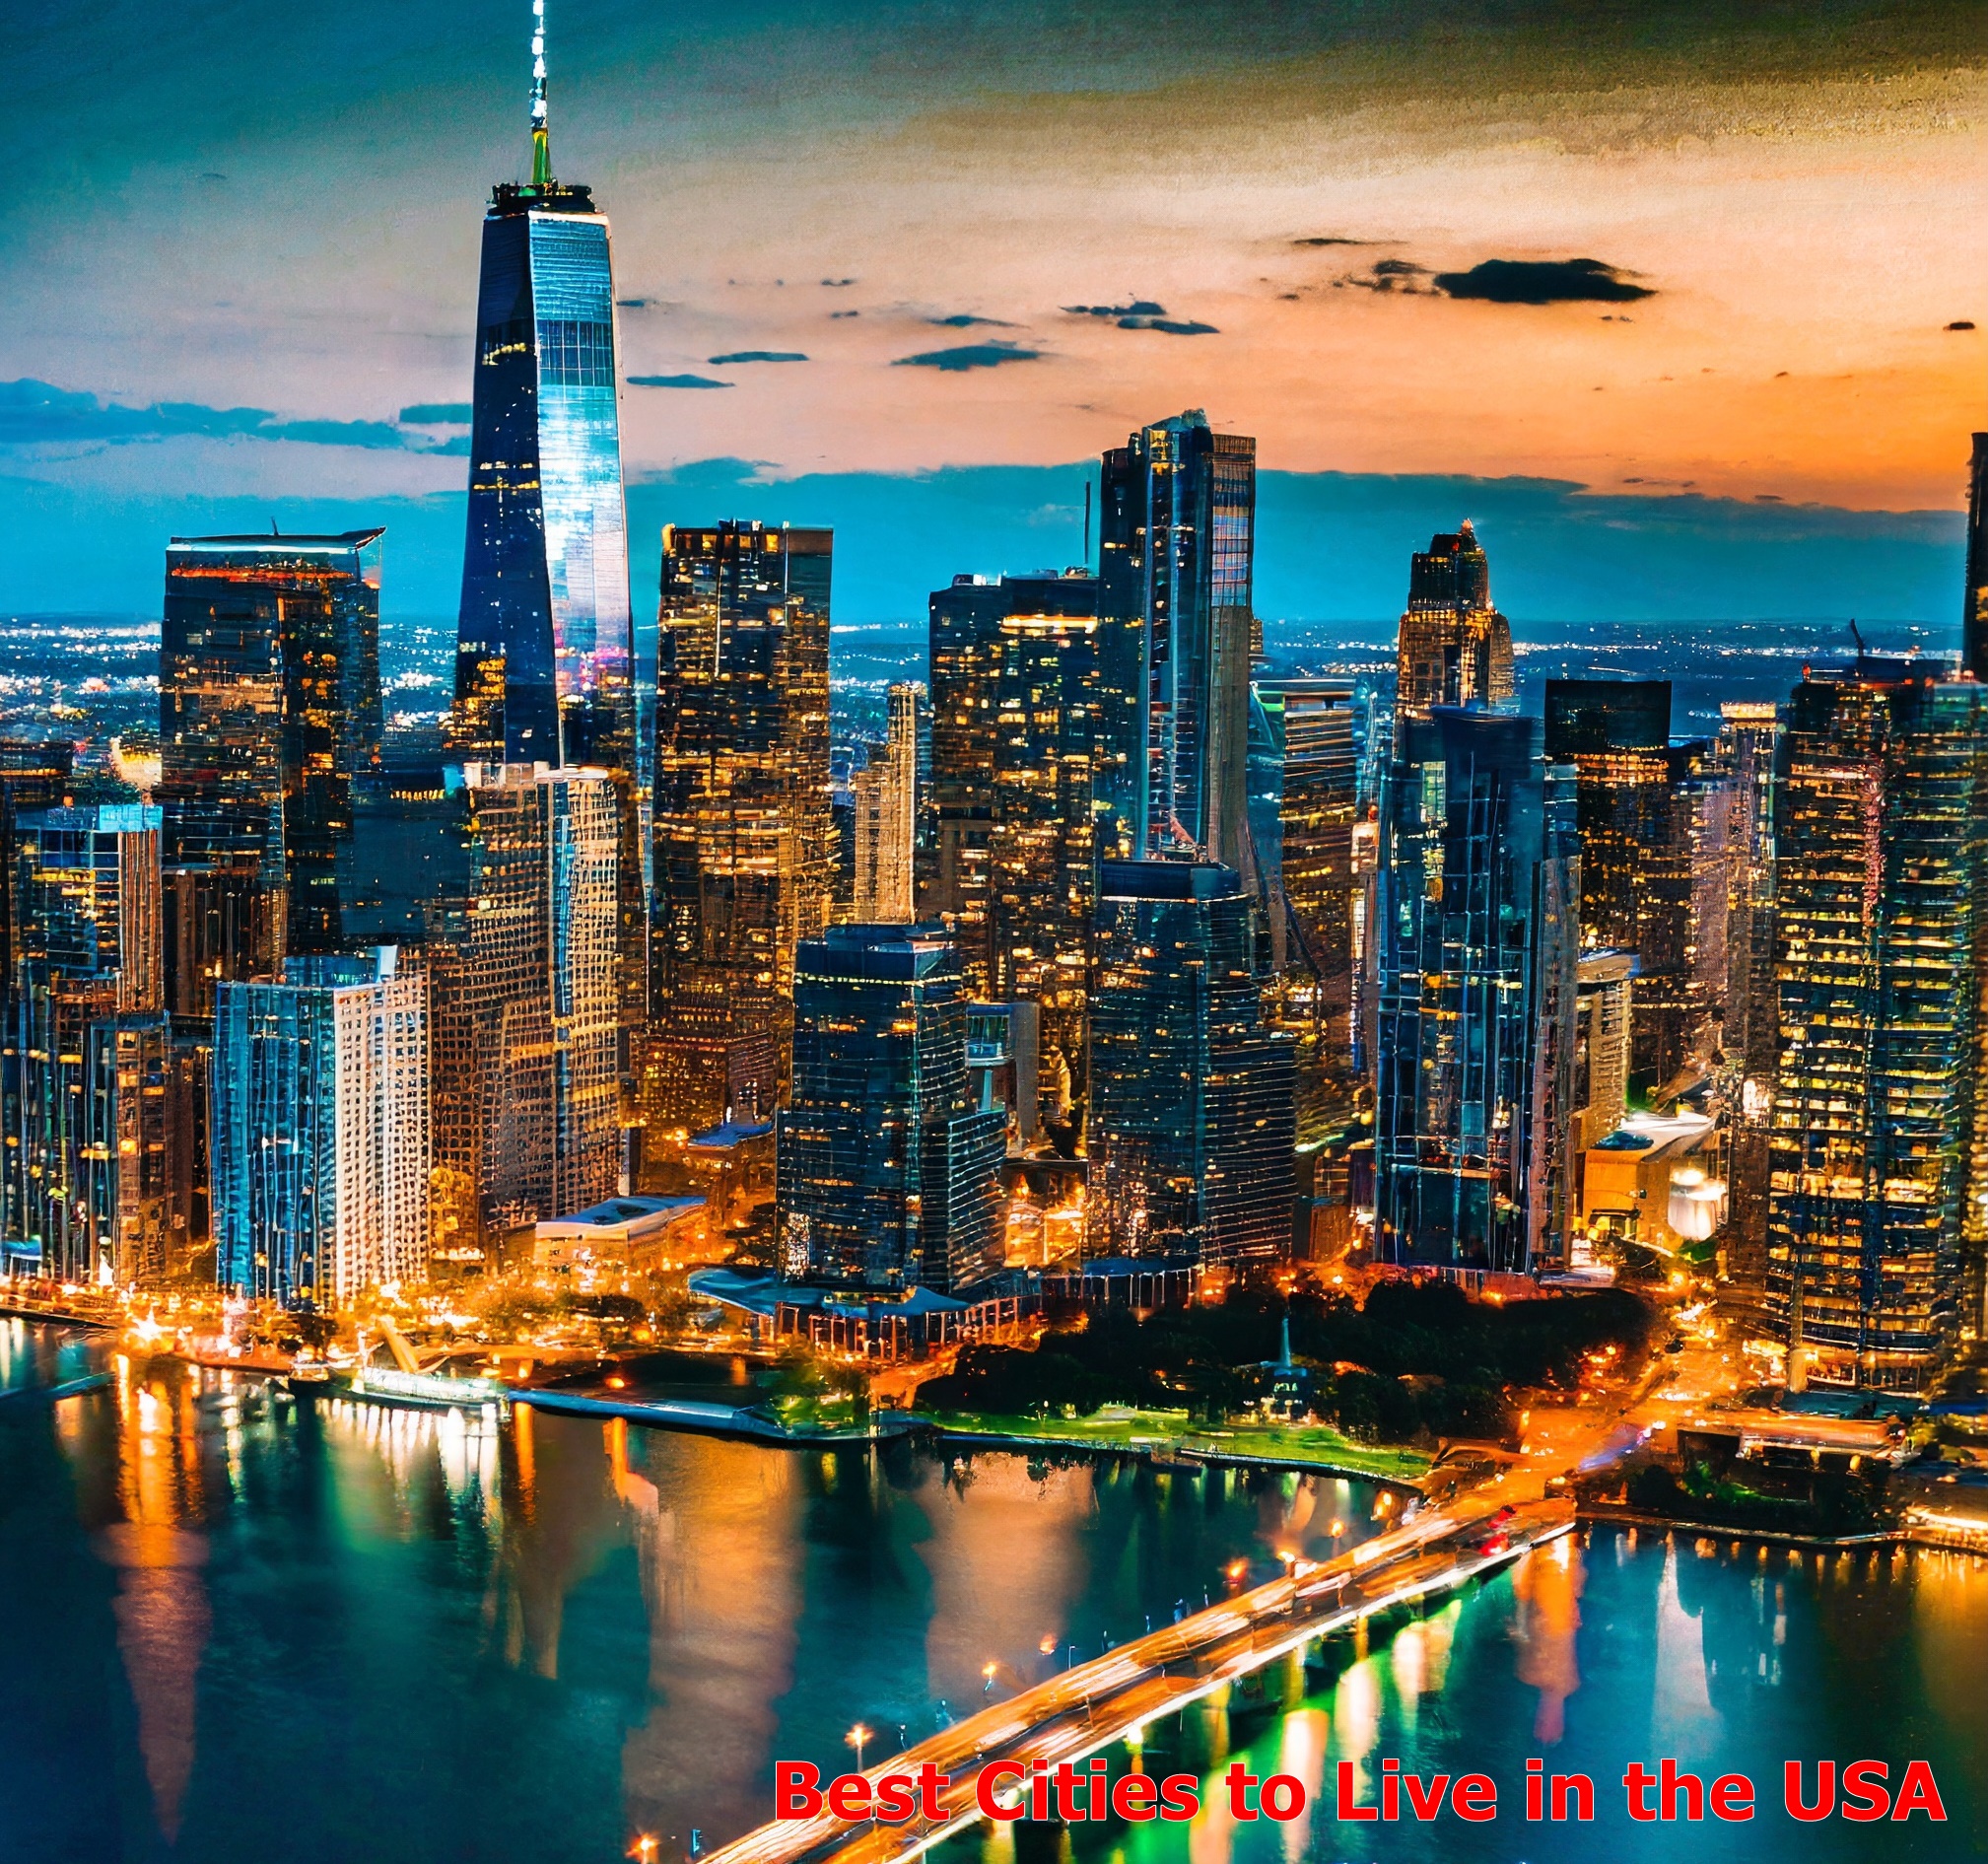 Best Cities to Live in the USA